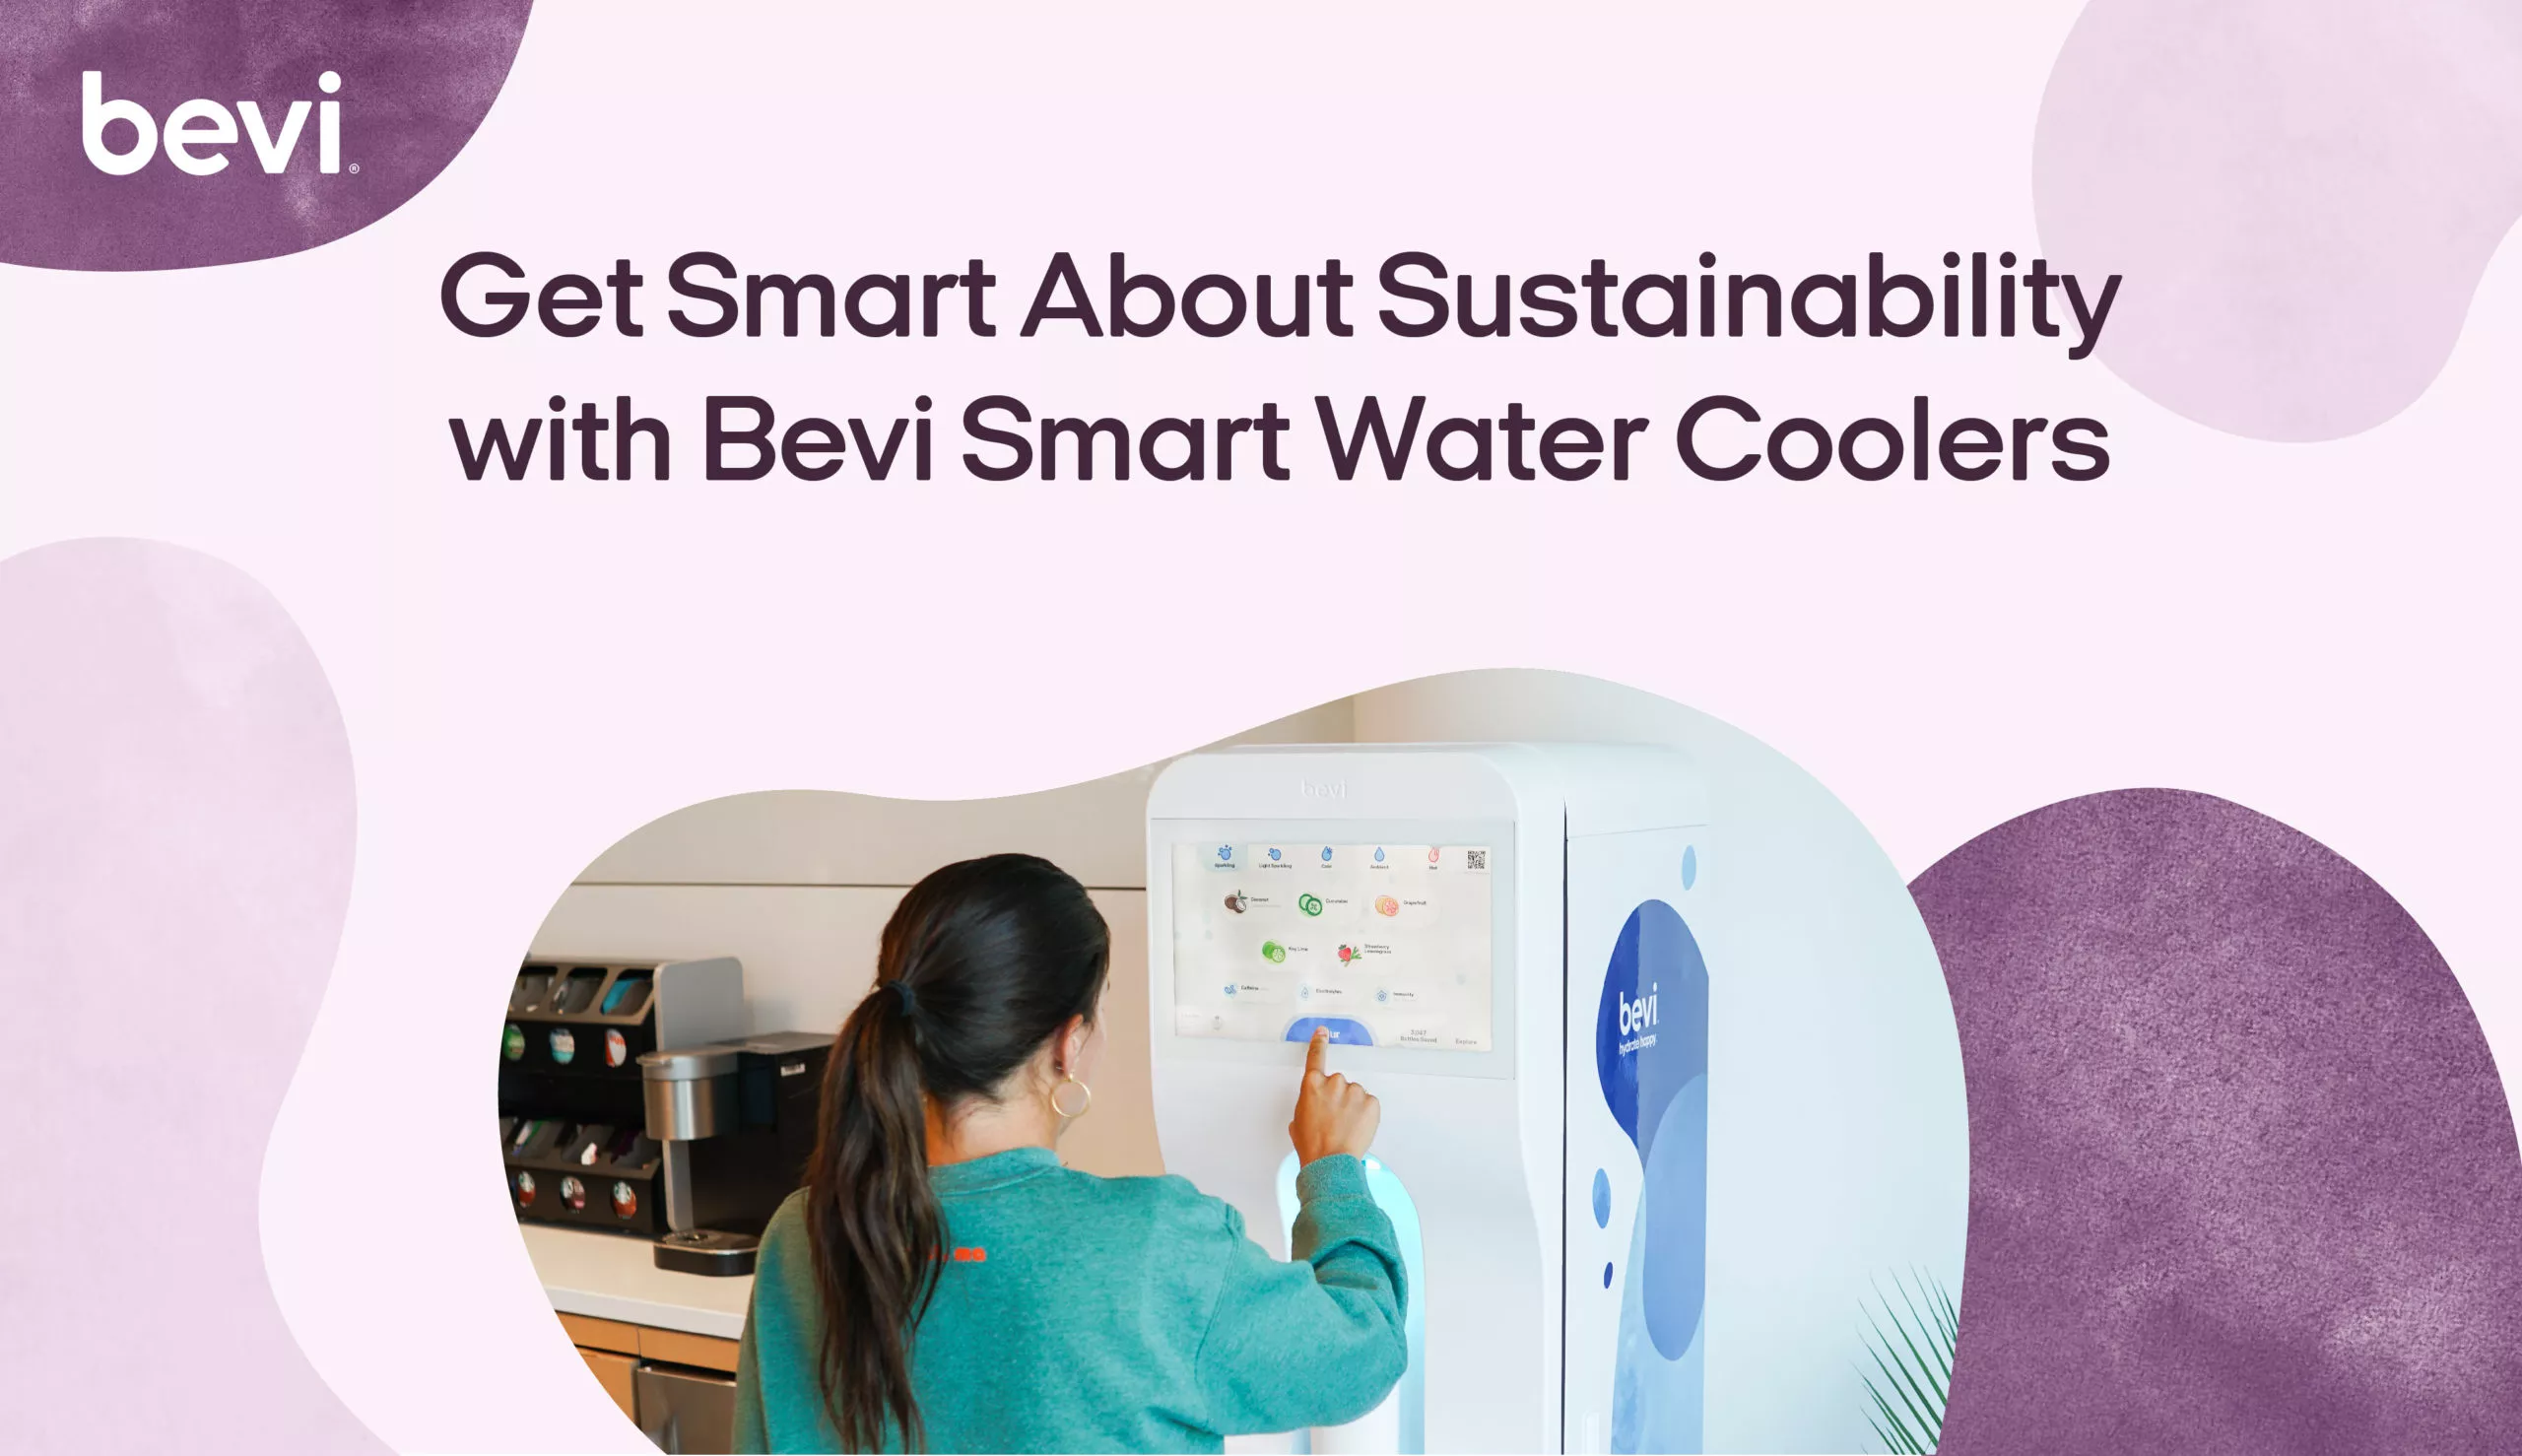 Get Smart About Sustainability with Bevi Smart Water Coolers